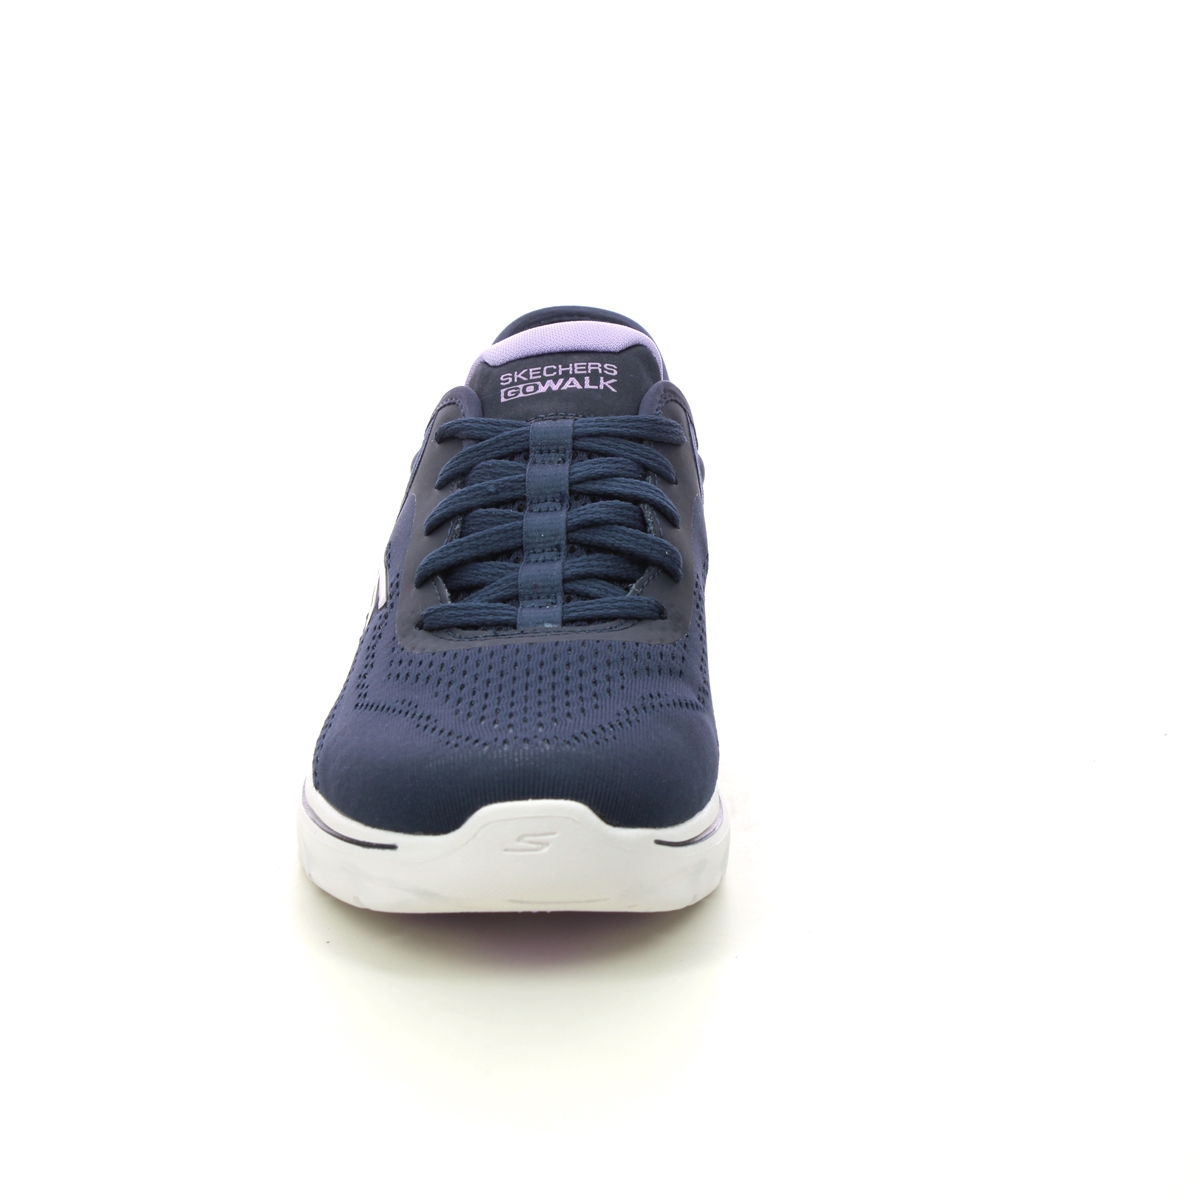 33A Womens Skechers Navy Lace Up Trainers Size 3 Uk - Designer